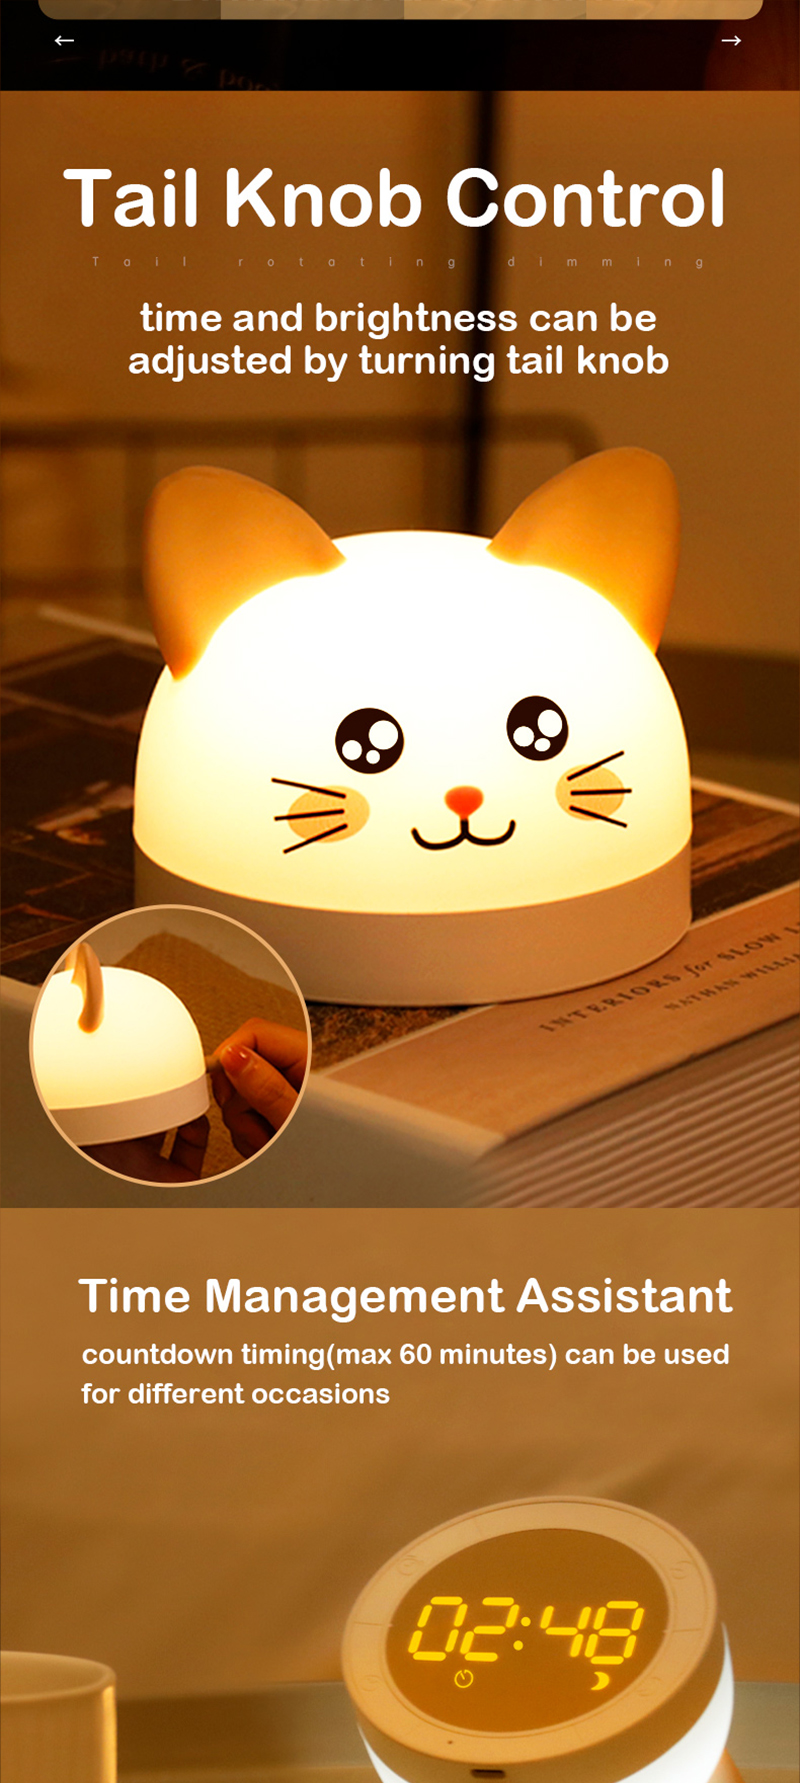 Cute Cat Alarm Clock For Children With 2 Colors LED Lamp Timer Snooze Rechargeable Night Light Christmas Kids Gifts